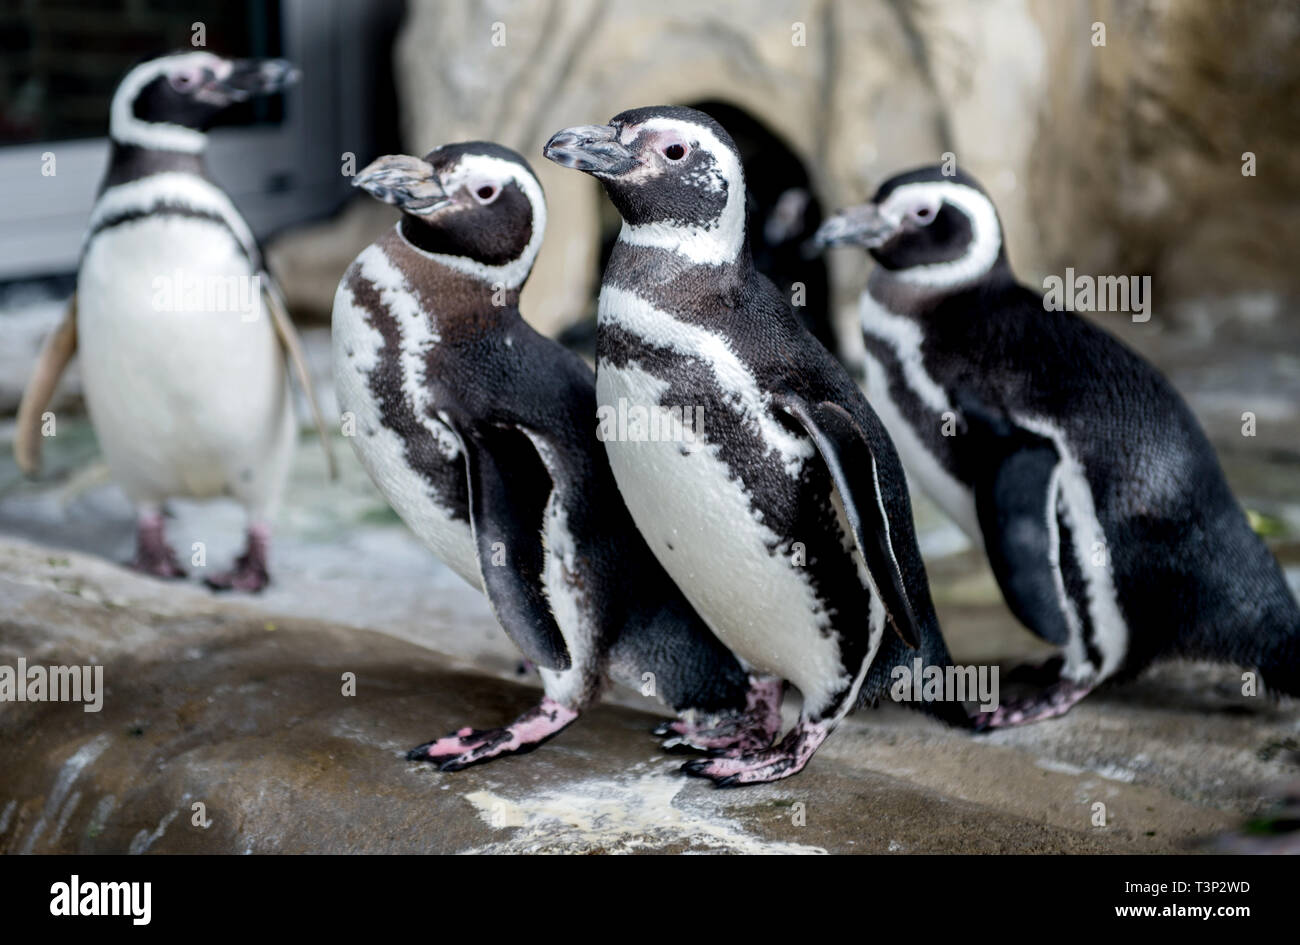 Wilhelmshaven, Germany. 11th Apr, 2019. The Magellanic penguins Berti (l-r), Ester, Verde and Rojo stand in their enclosure in the Aquarium Wilhelmshaven. The redesigned penguin enclosure will be reminiscent of a small piece of South America and offer the six Magellan penguins a new home. Credit: Hauke-Christian Dittrich/dpa/Alamy Live News Stock Photo